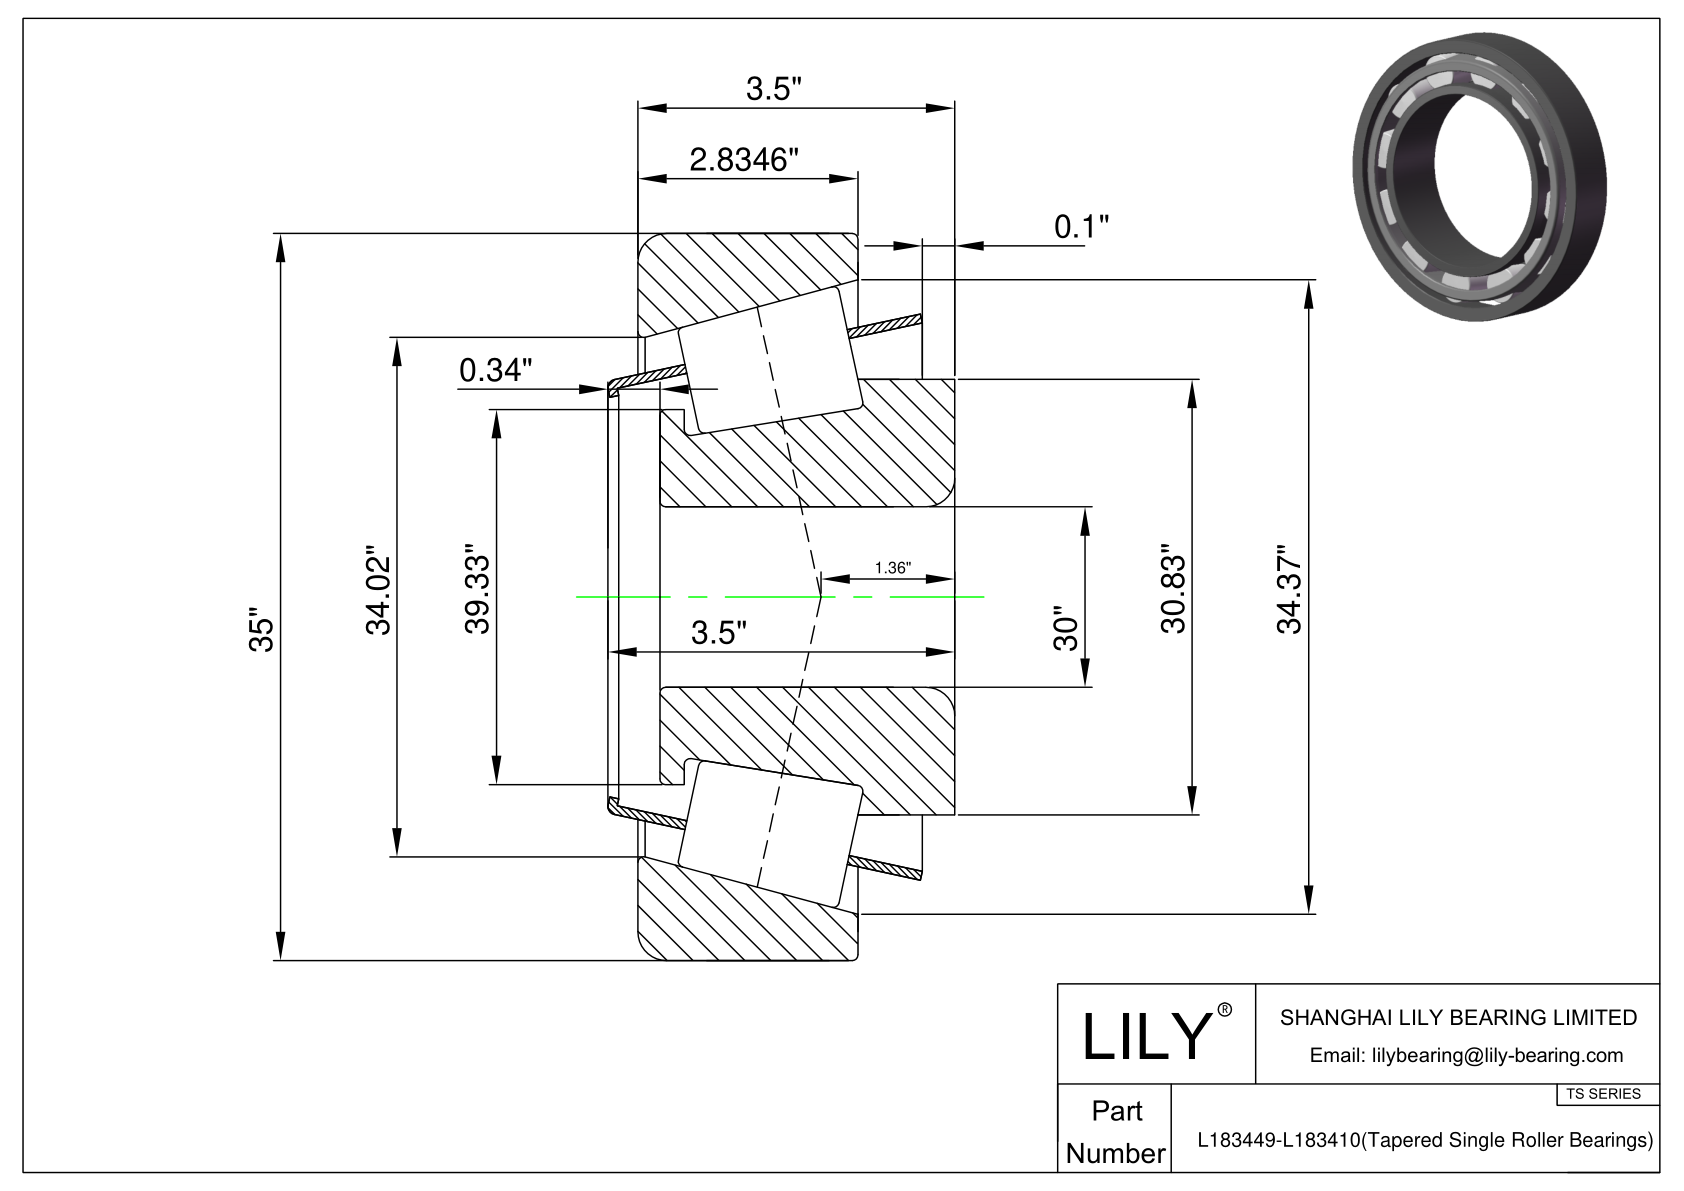 L183449-L183410 TS (Tapered Single Roller Bearings) (Imperial) cad drawing